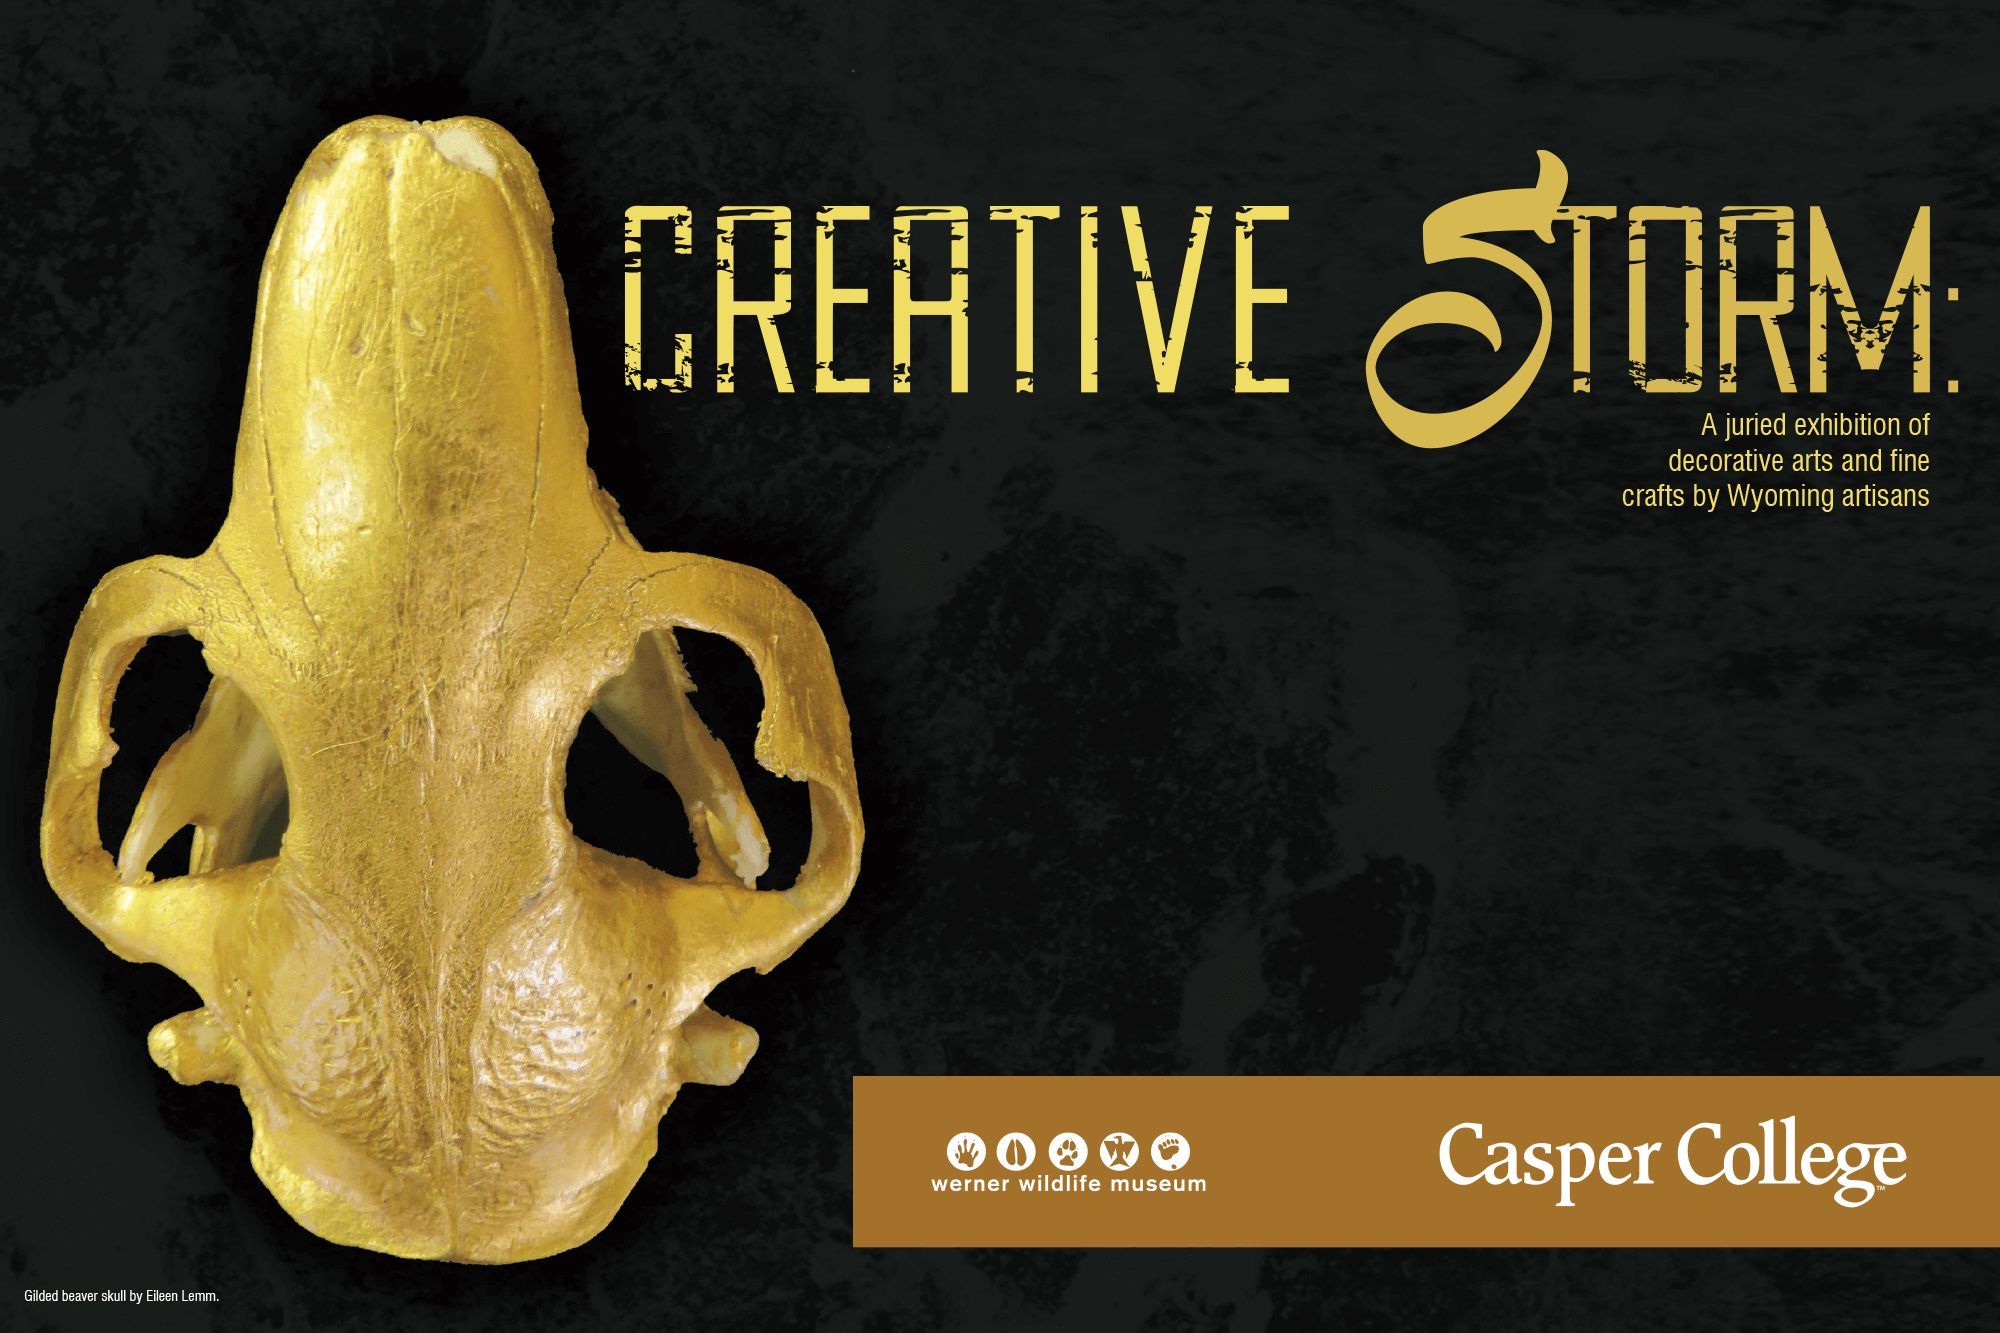 Image featuring a gold-colored beaver skull with the words "Creative Storm."